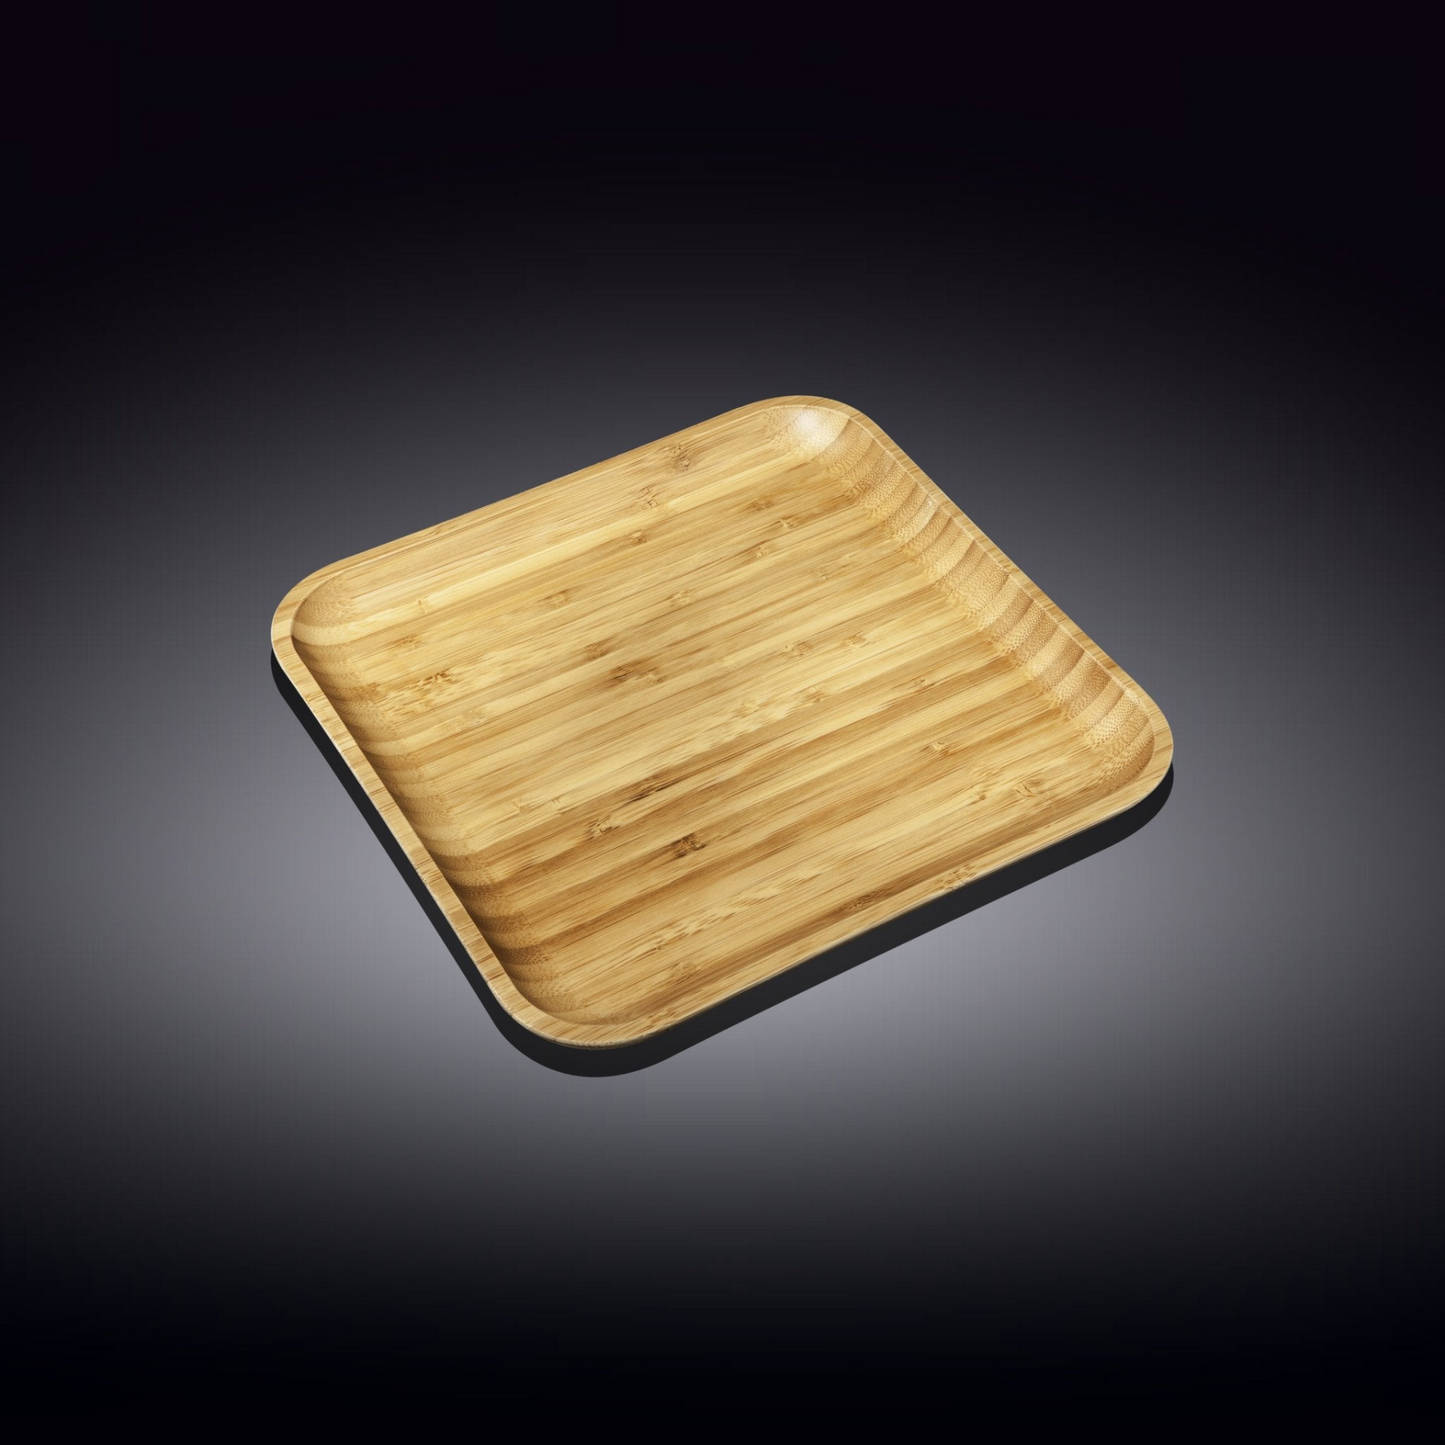 Wilmax Bamboo Wood Square Plate 8" X 8" |  For Appetizers / Barbecue  WL-771021/A